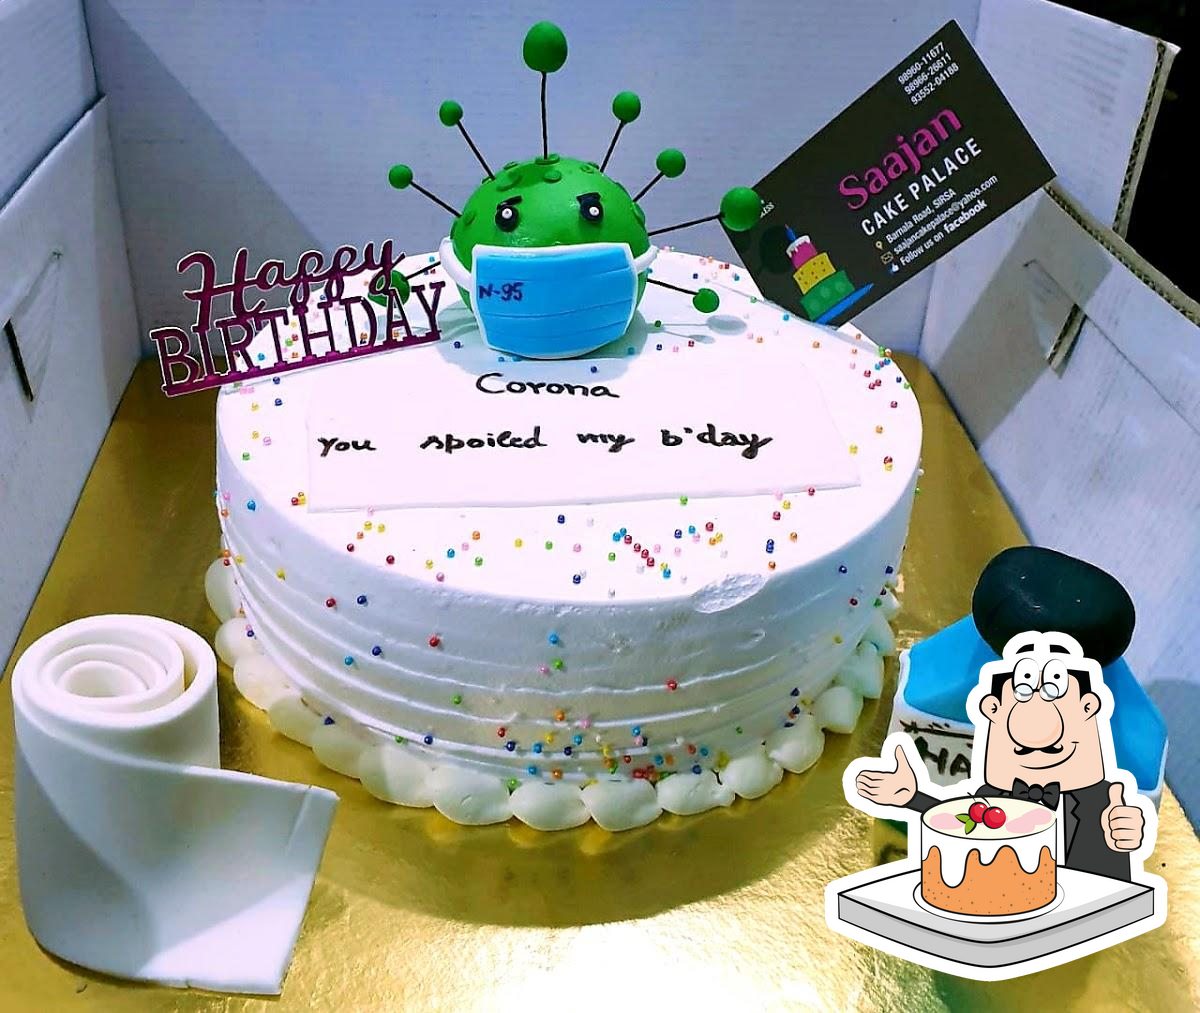 Kids Birthday Cake Design:Amazon.com:Appstore for Android